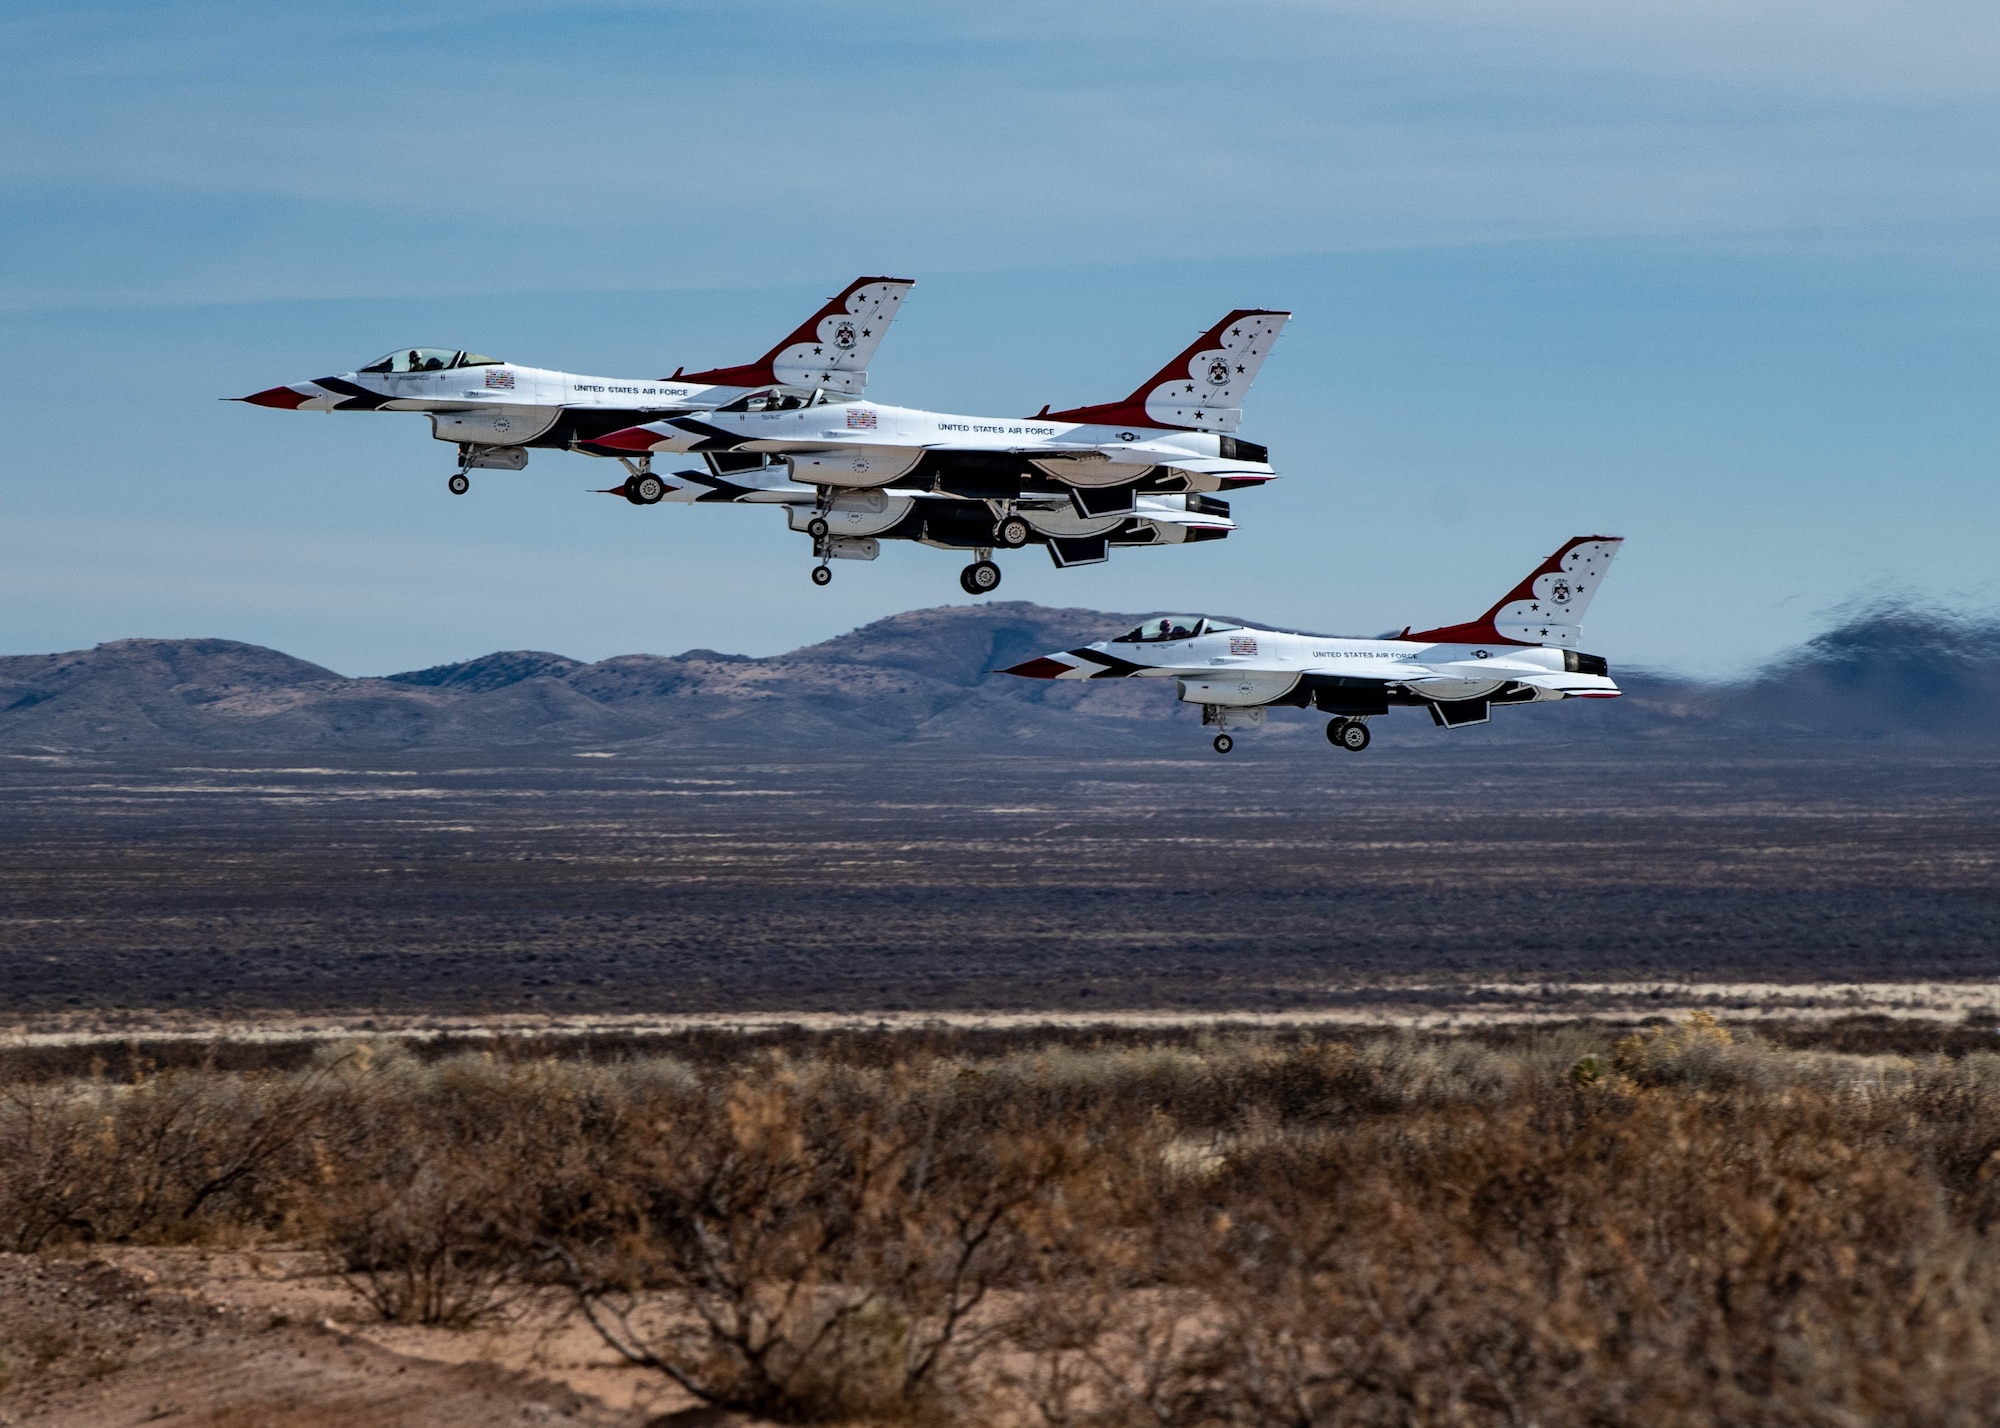 "Thunderbirds" takeoff for their first flight during this year's winter training trip January 11, 2022 at Spaceport America